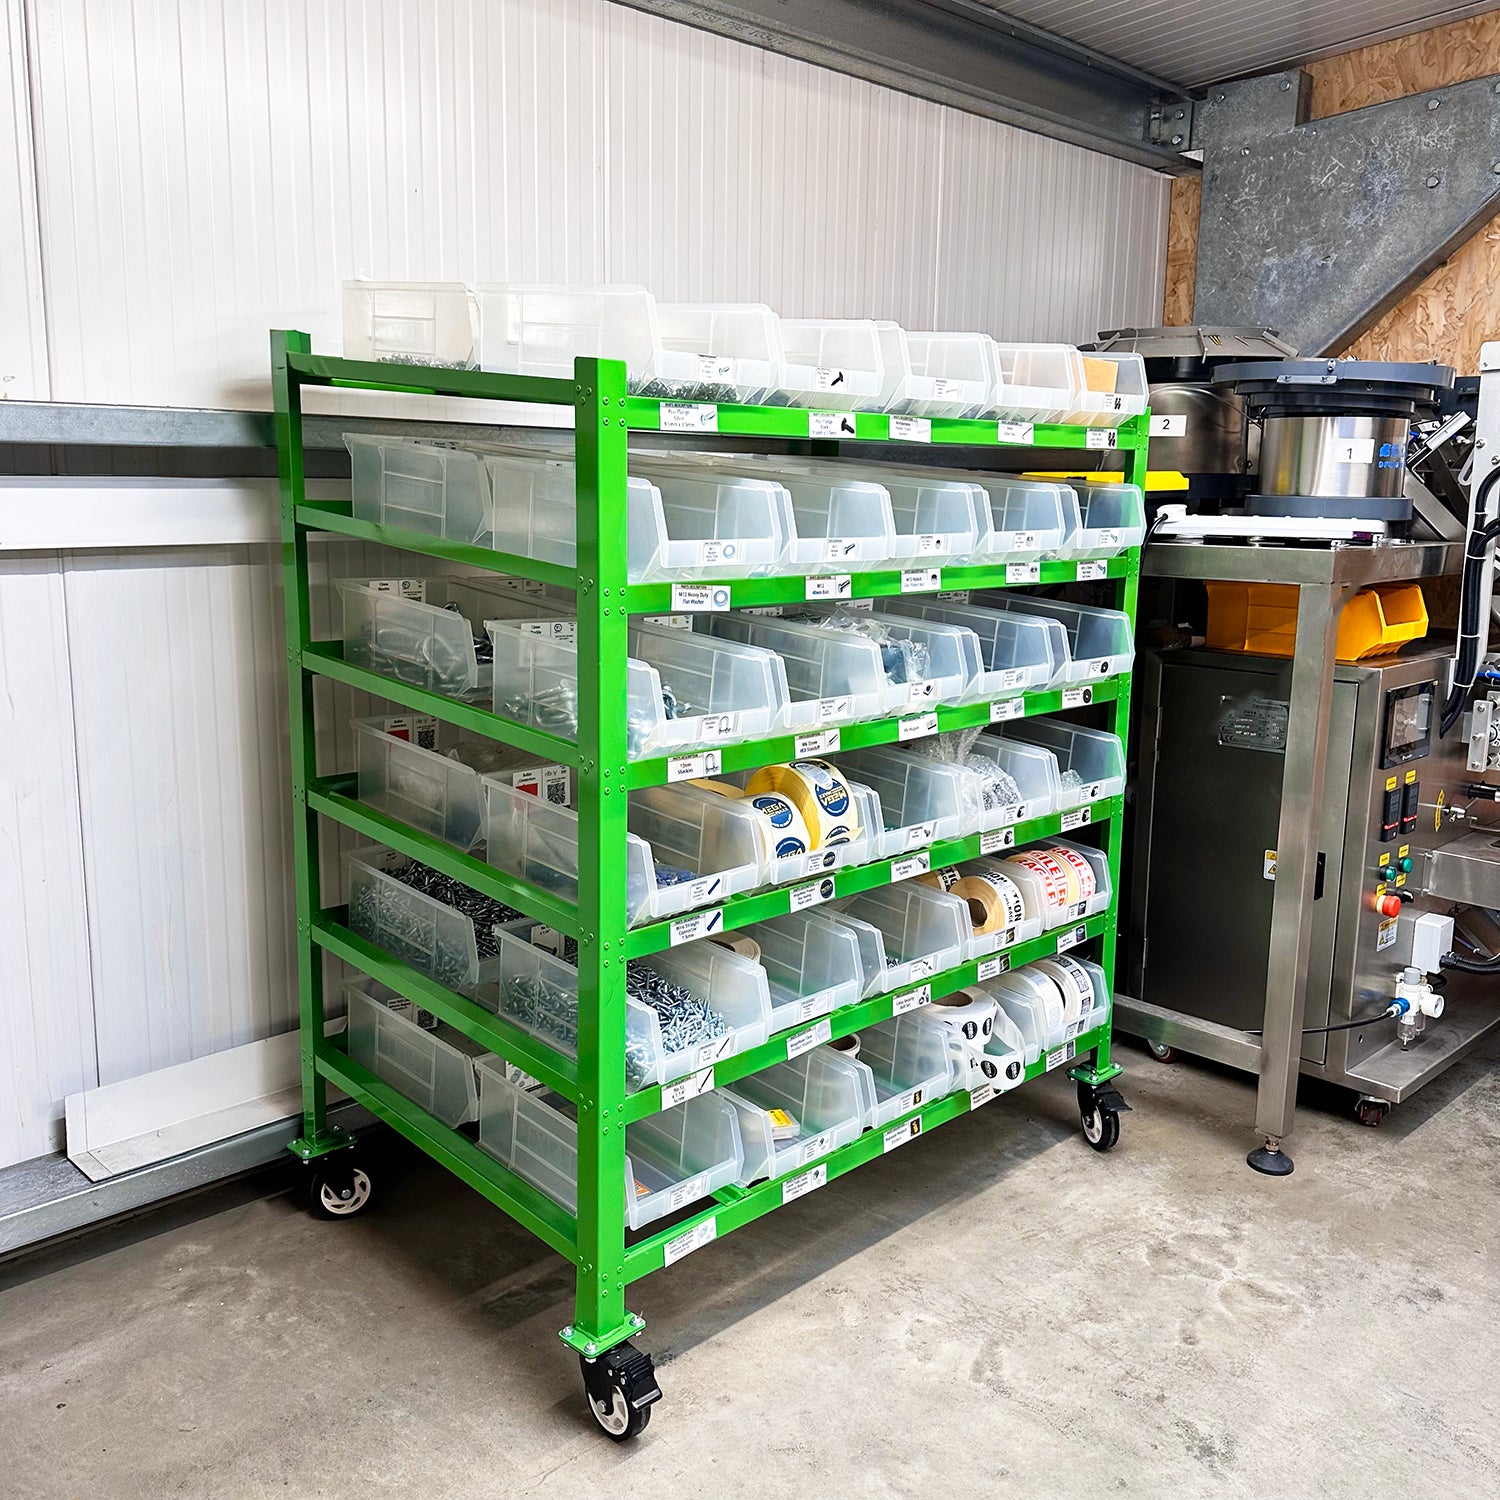 MegaMaxx PRO XL4 Boxes 2-Bin System Trolley Racking Unit (Holds 60 Boxes) - Indoor Outdoors